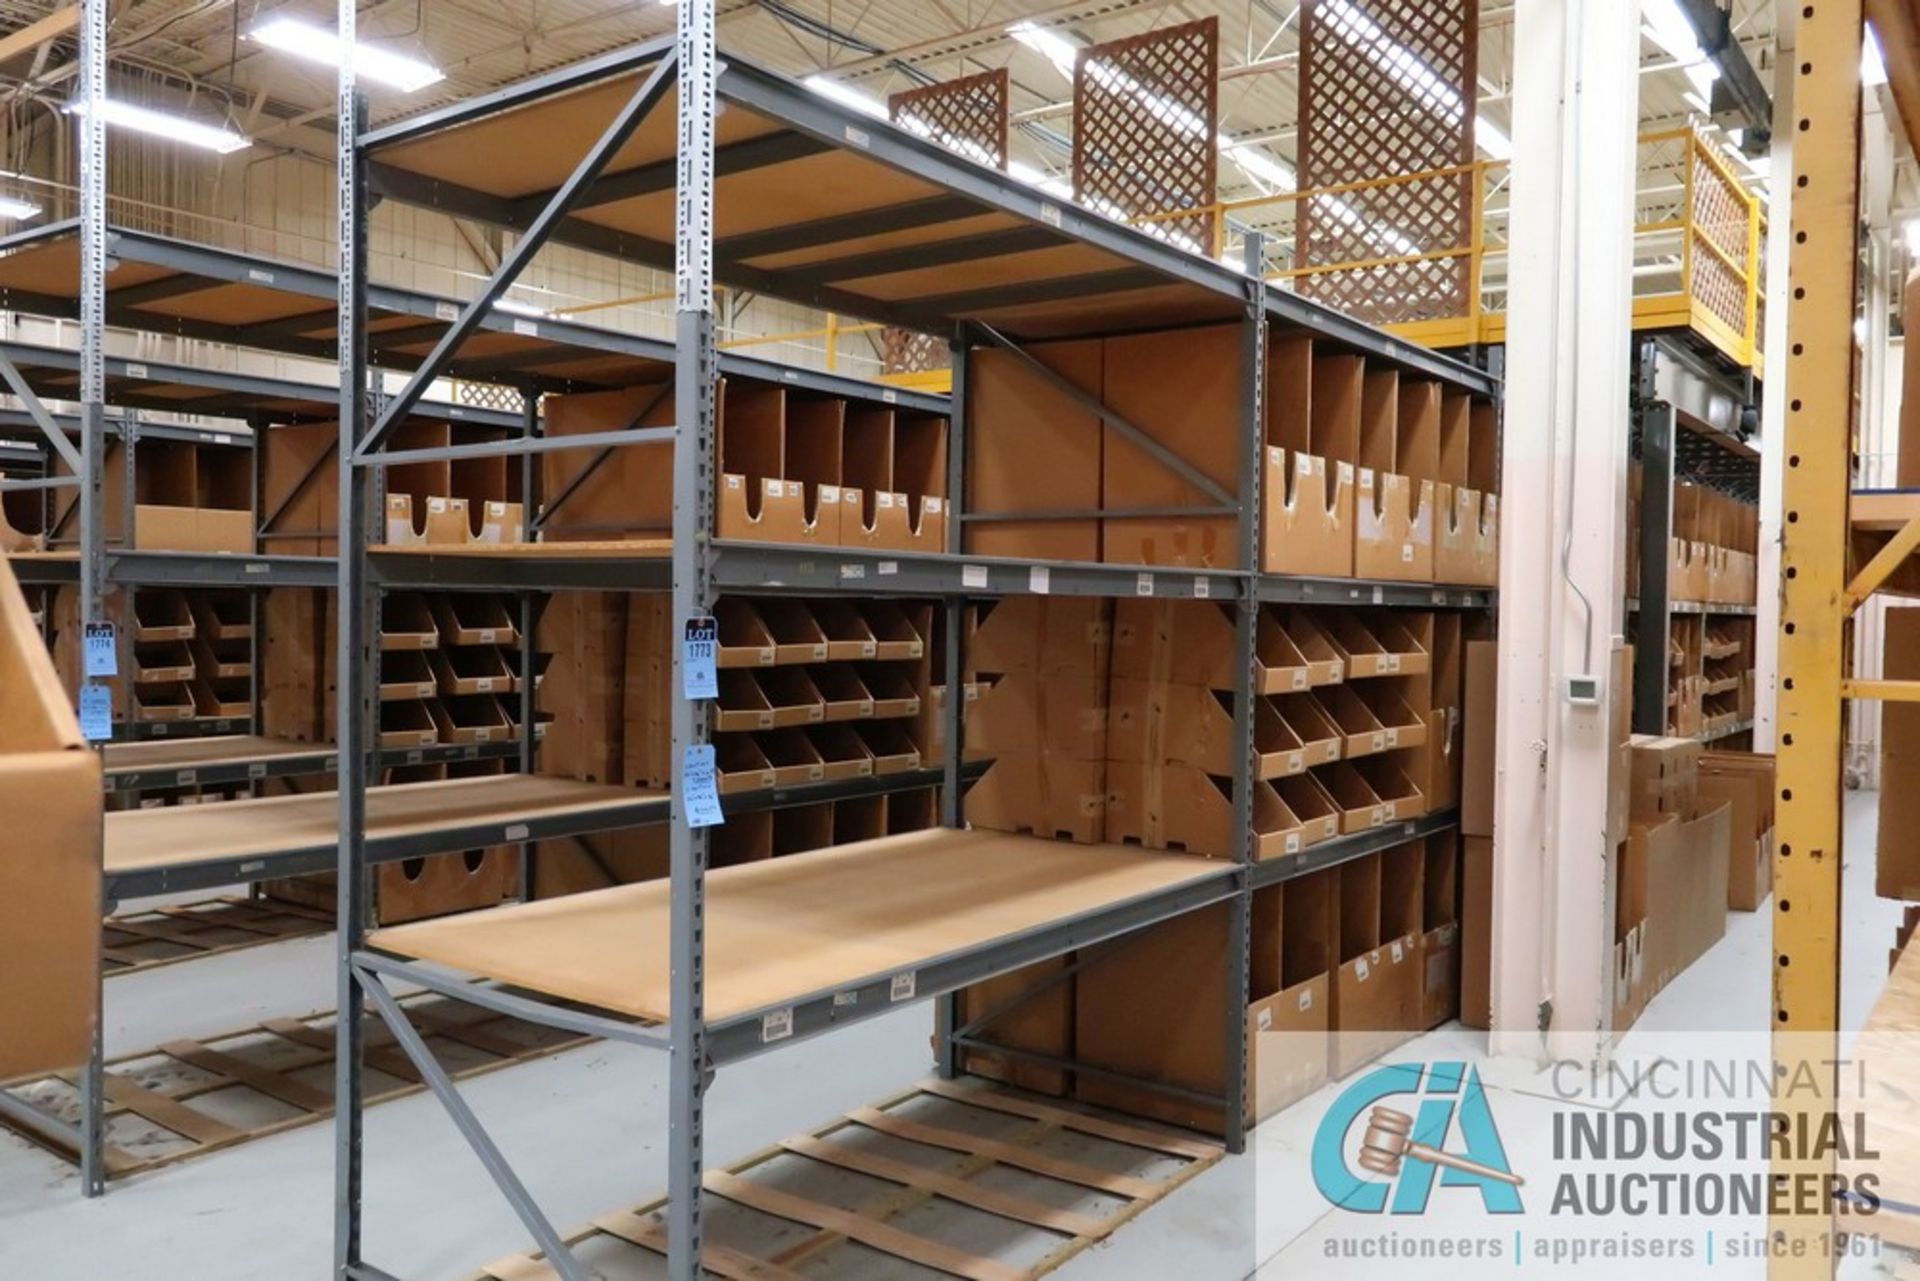 SECTIONS 50" X 96" X 10' STEEL RACKING, (3) SHELVES PER SECTION, (18) BEAMS AND (9) SHEETS OF